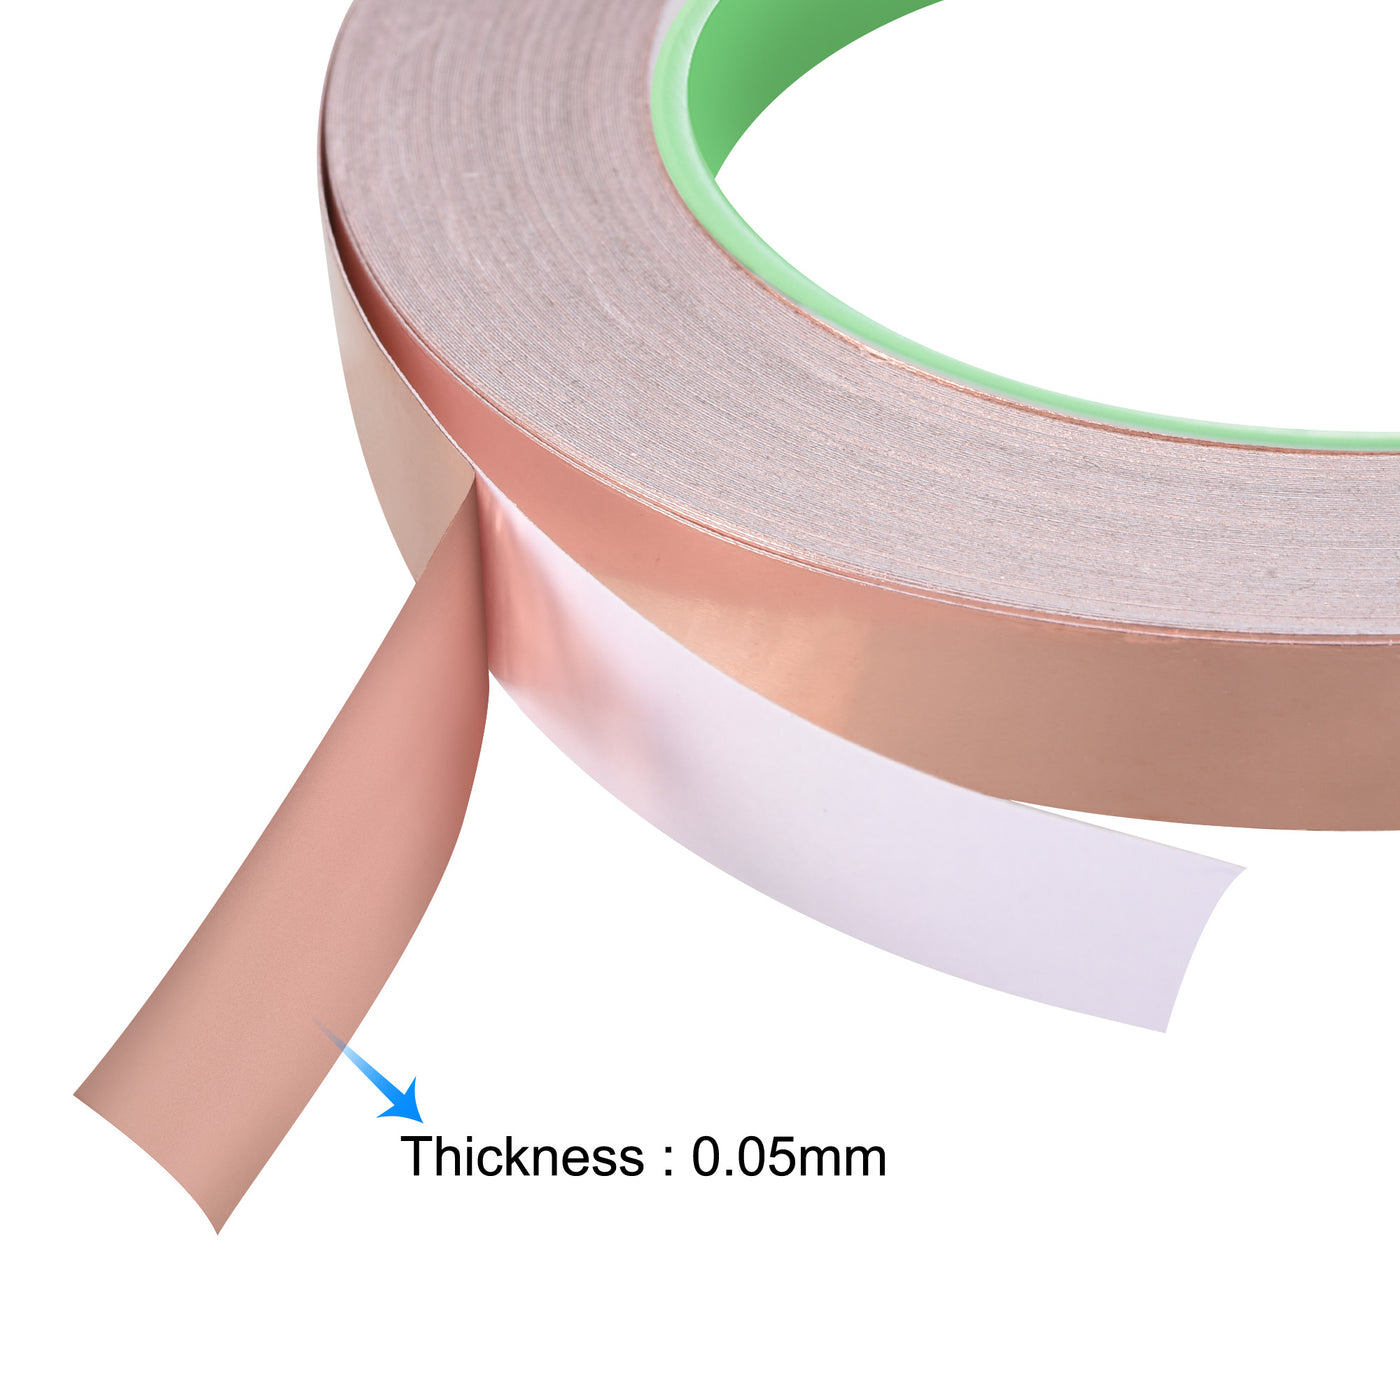 uxcell Uxcell Double-Sided Conductive Tape Copper Foil Tape 10mm x 30m/98.4ft 1pcs